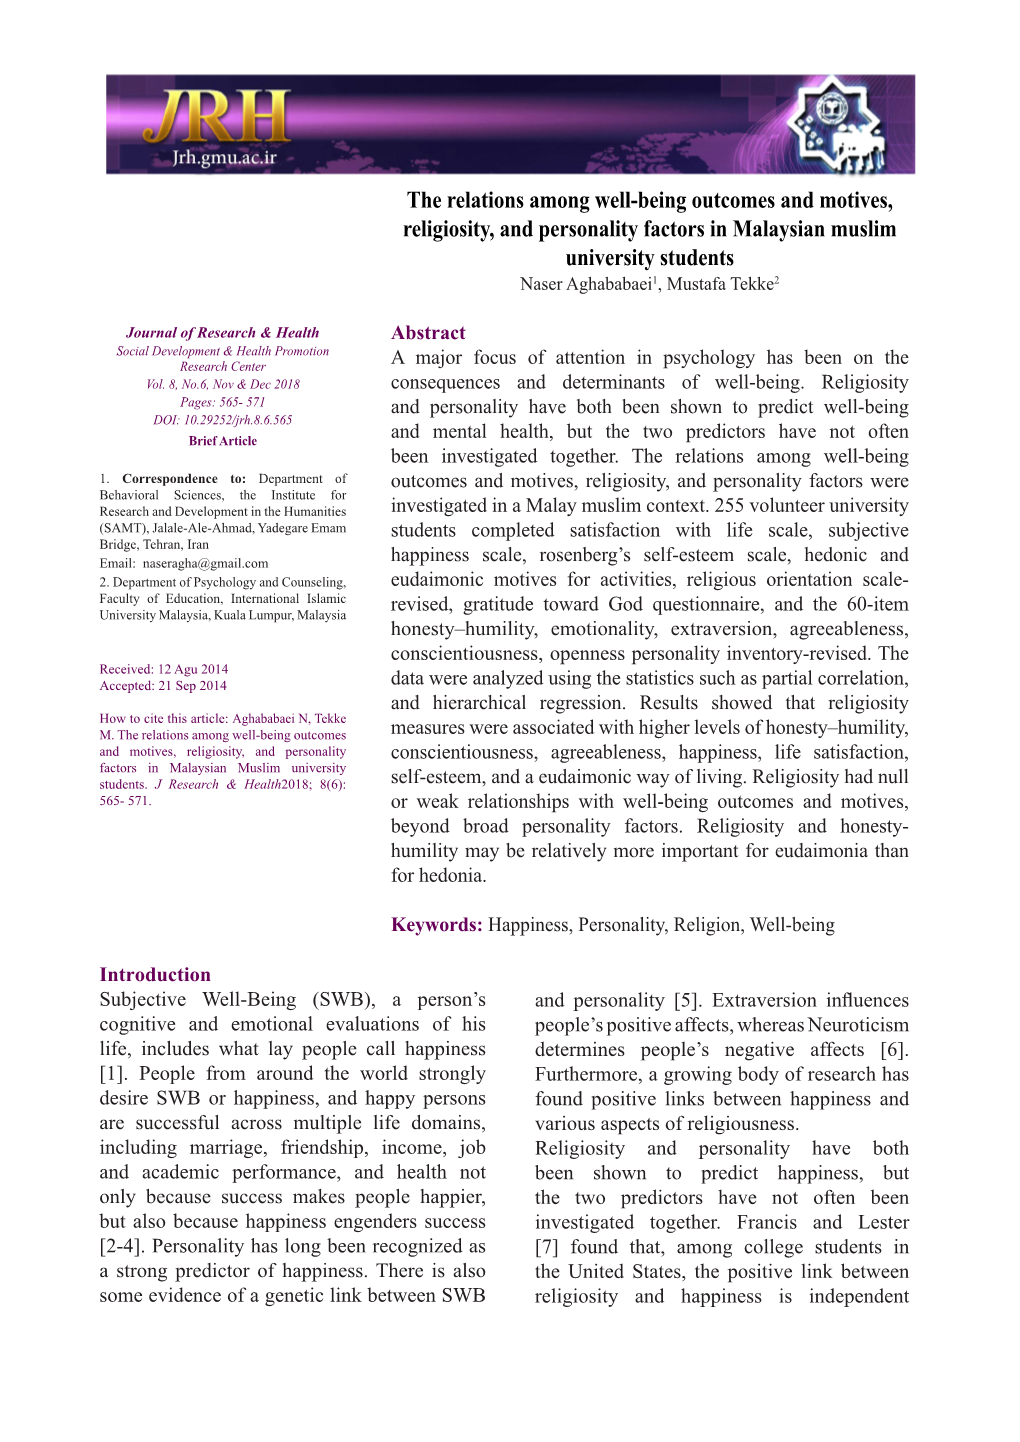 The Relations Among Well-Being Outcomes and Motives, Religiosity, and Personality Factors in Malaysian Muslim University Students Naser Aghababaei1, Mustafa Tekke2